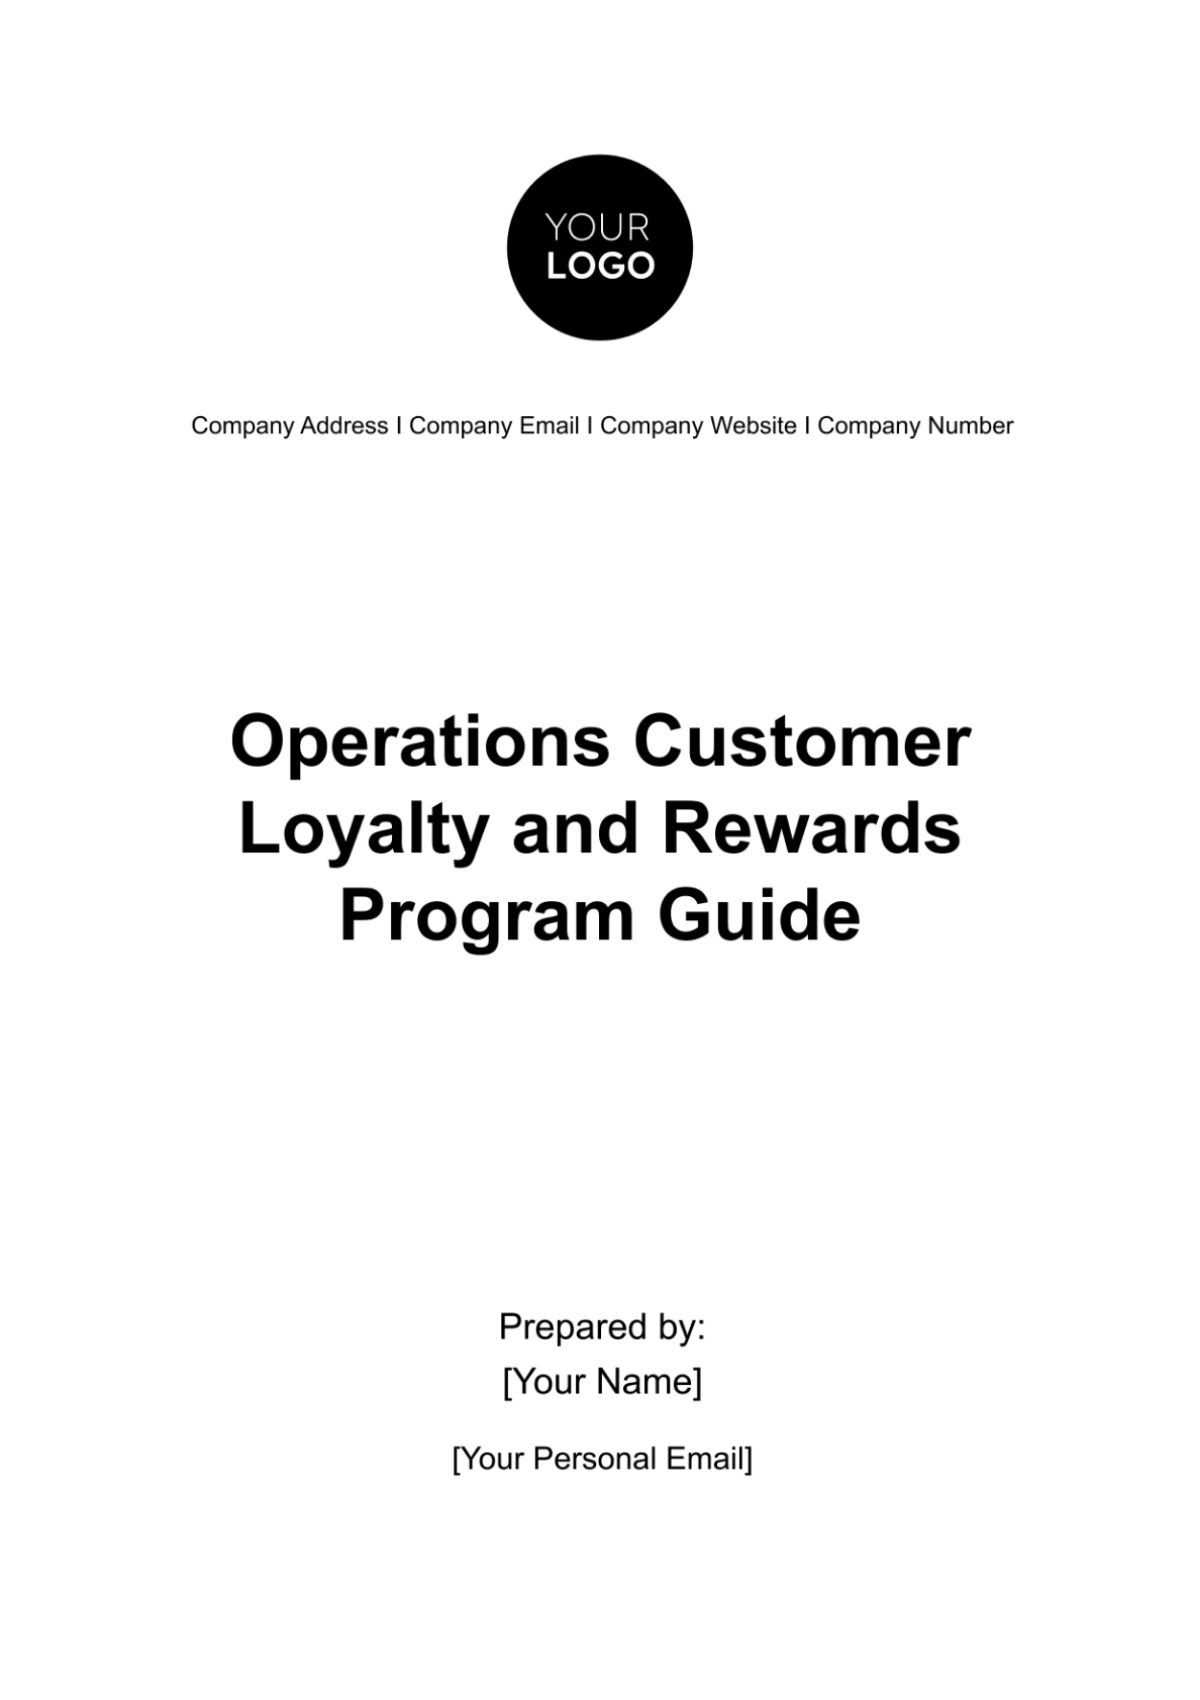 Operations Customer Loyalty and Rewards Program Guide Template